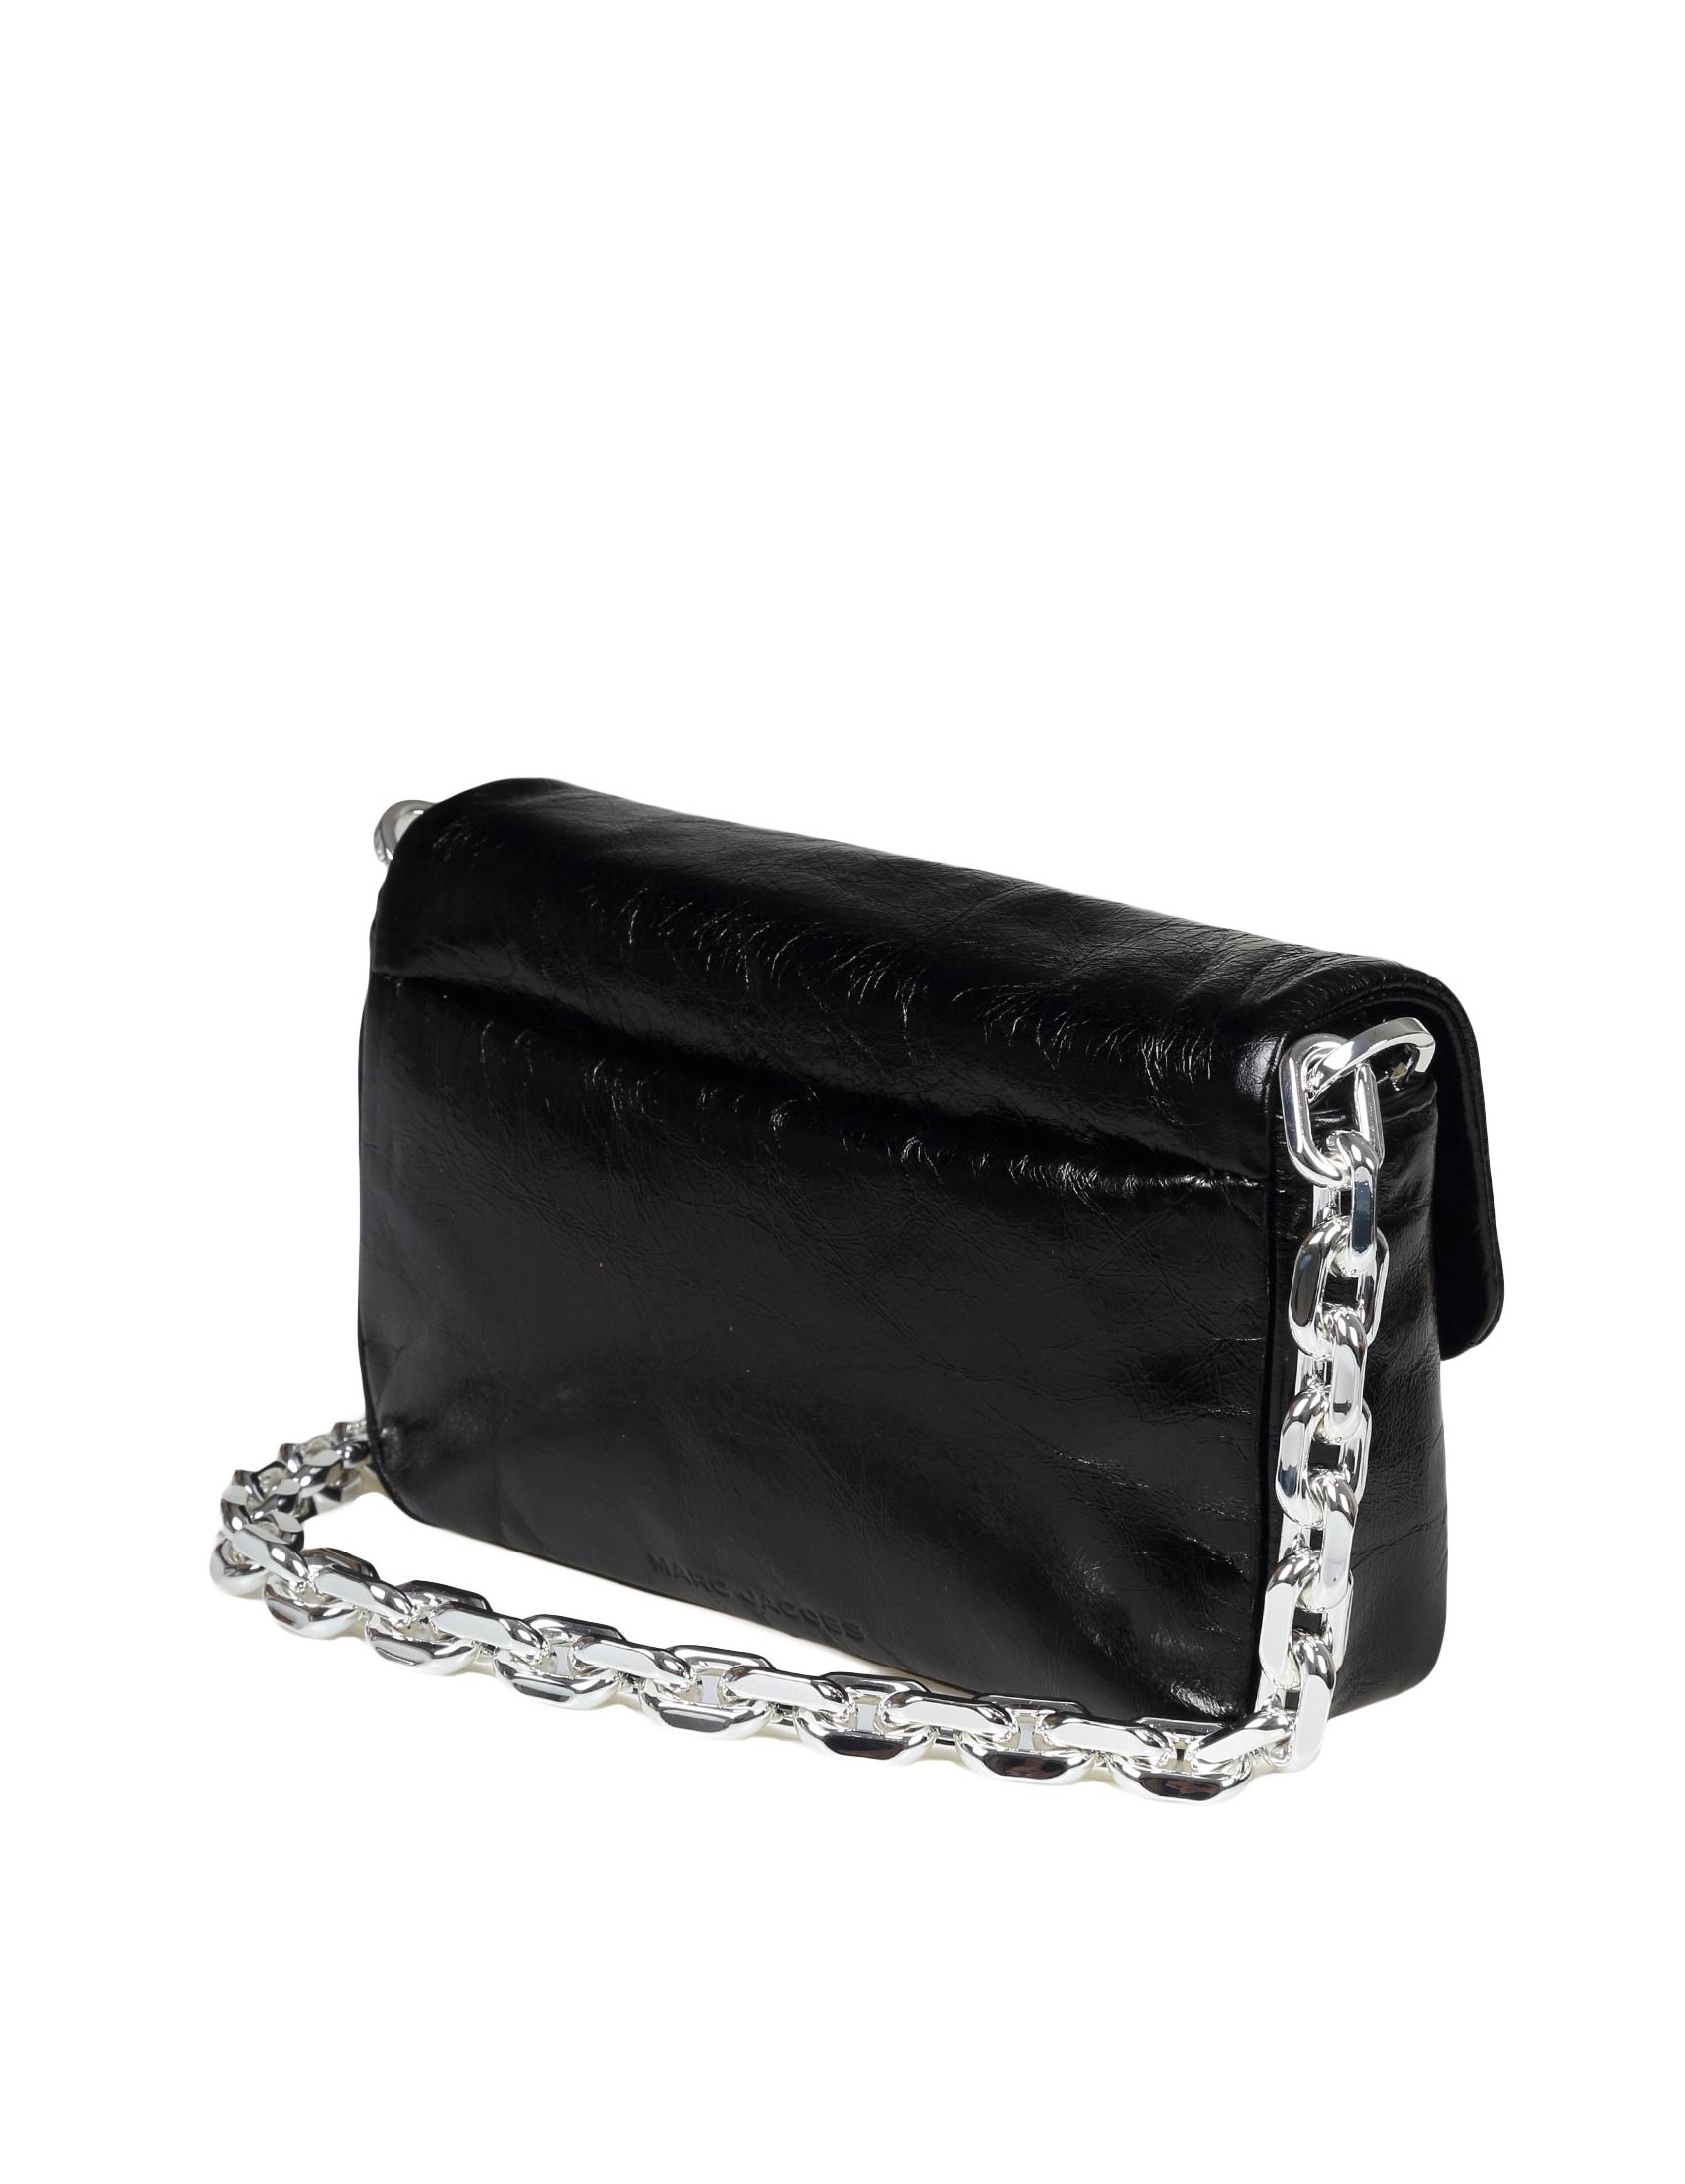 MARC JACOBS THE MINI PILLOW SHOULDER BAG IN BLACK LEATHER